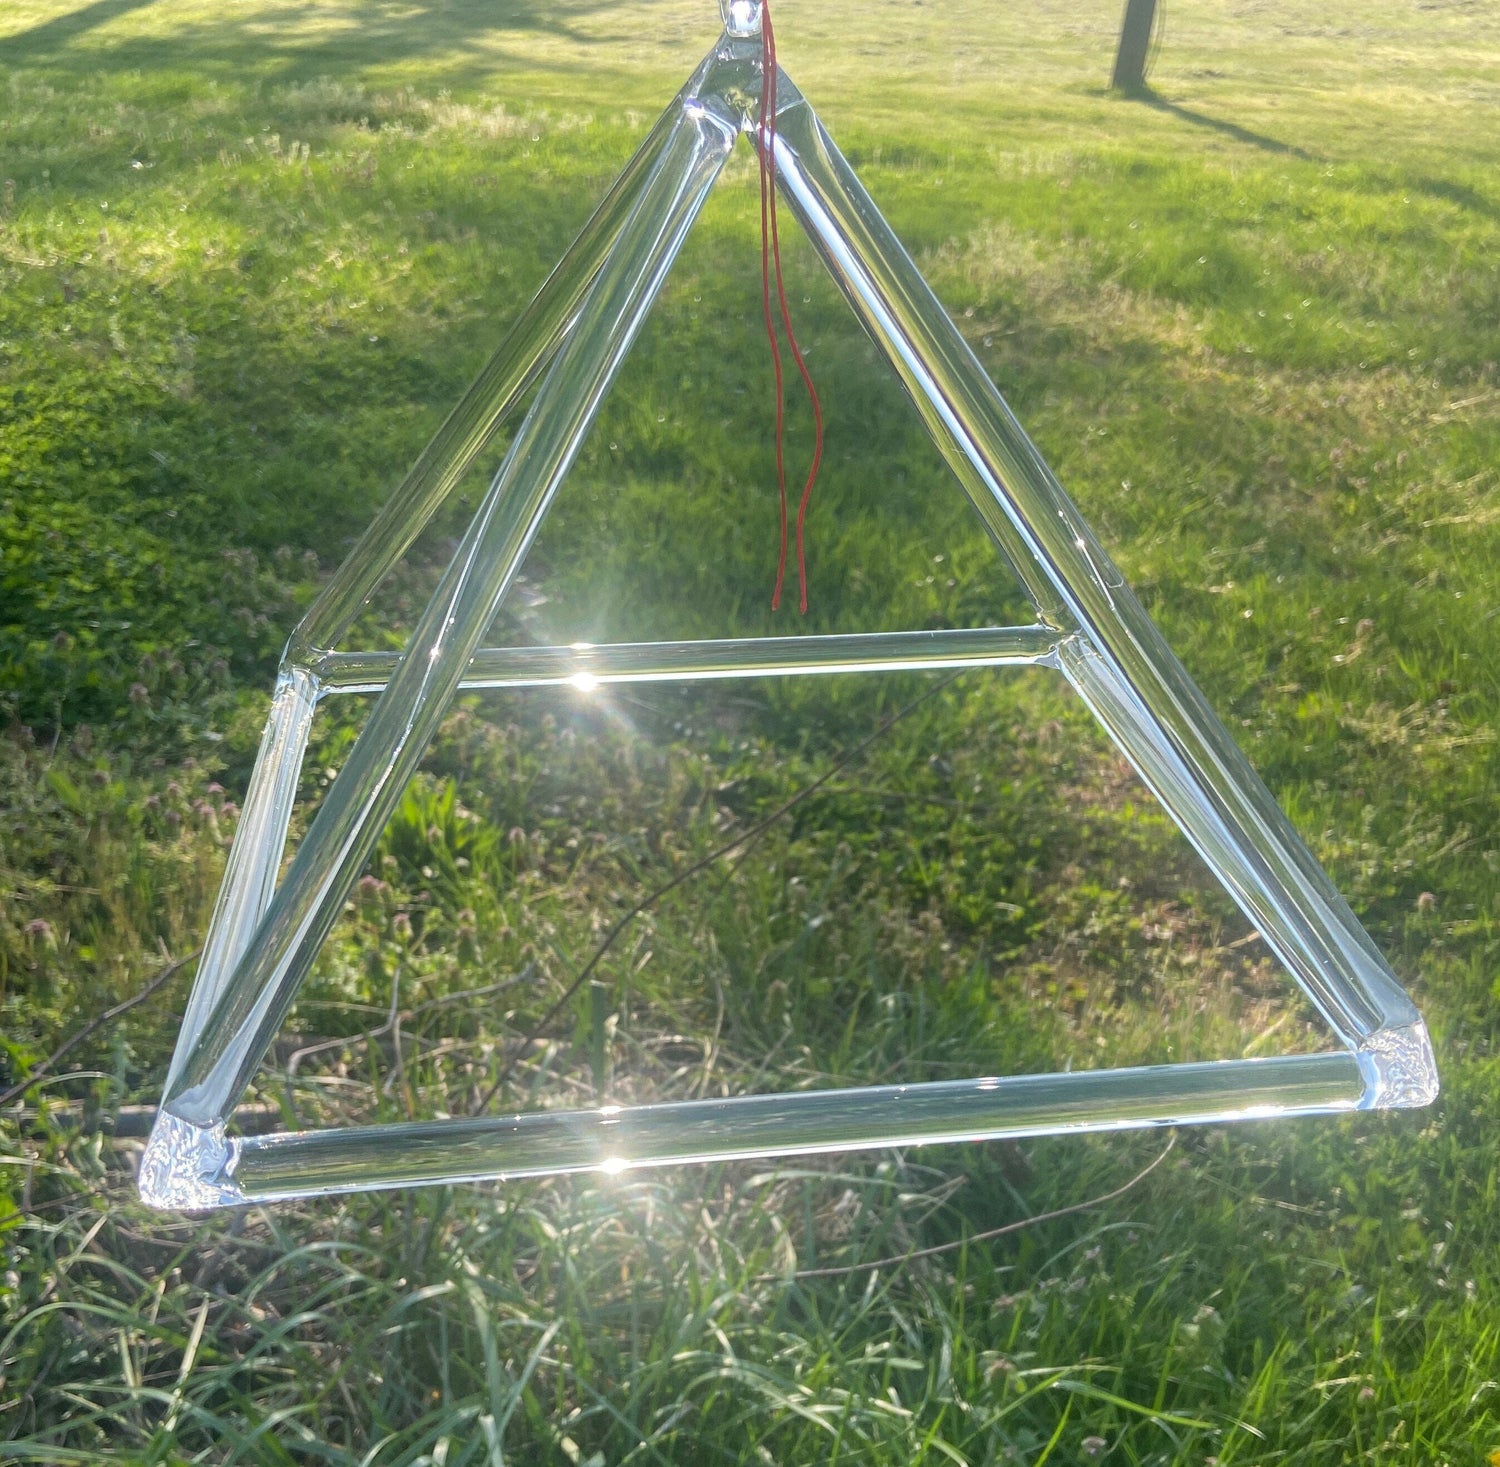 10” Clear Quartz Crystal Singing Pyramid Sound Vibration Musical Instrument With Carry Bag and Striker